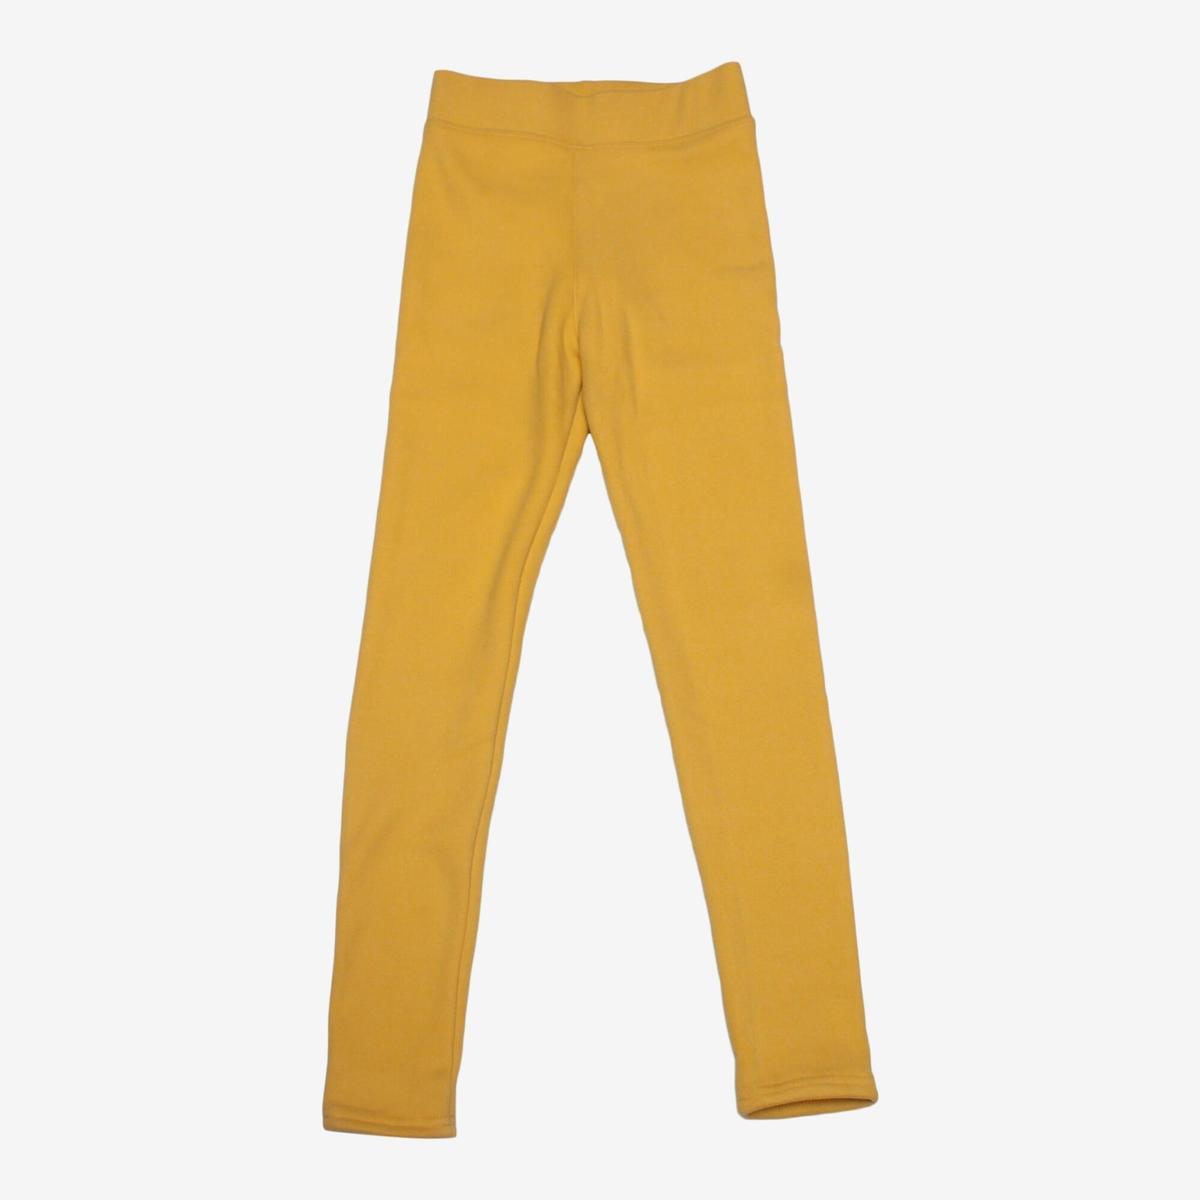 yellow cotton womens legging with fur inside